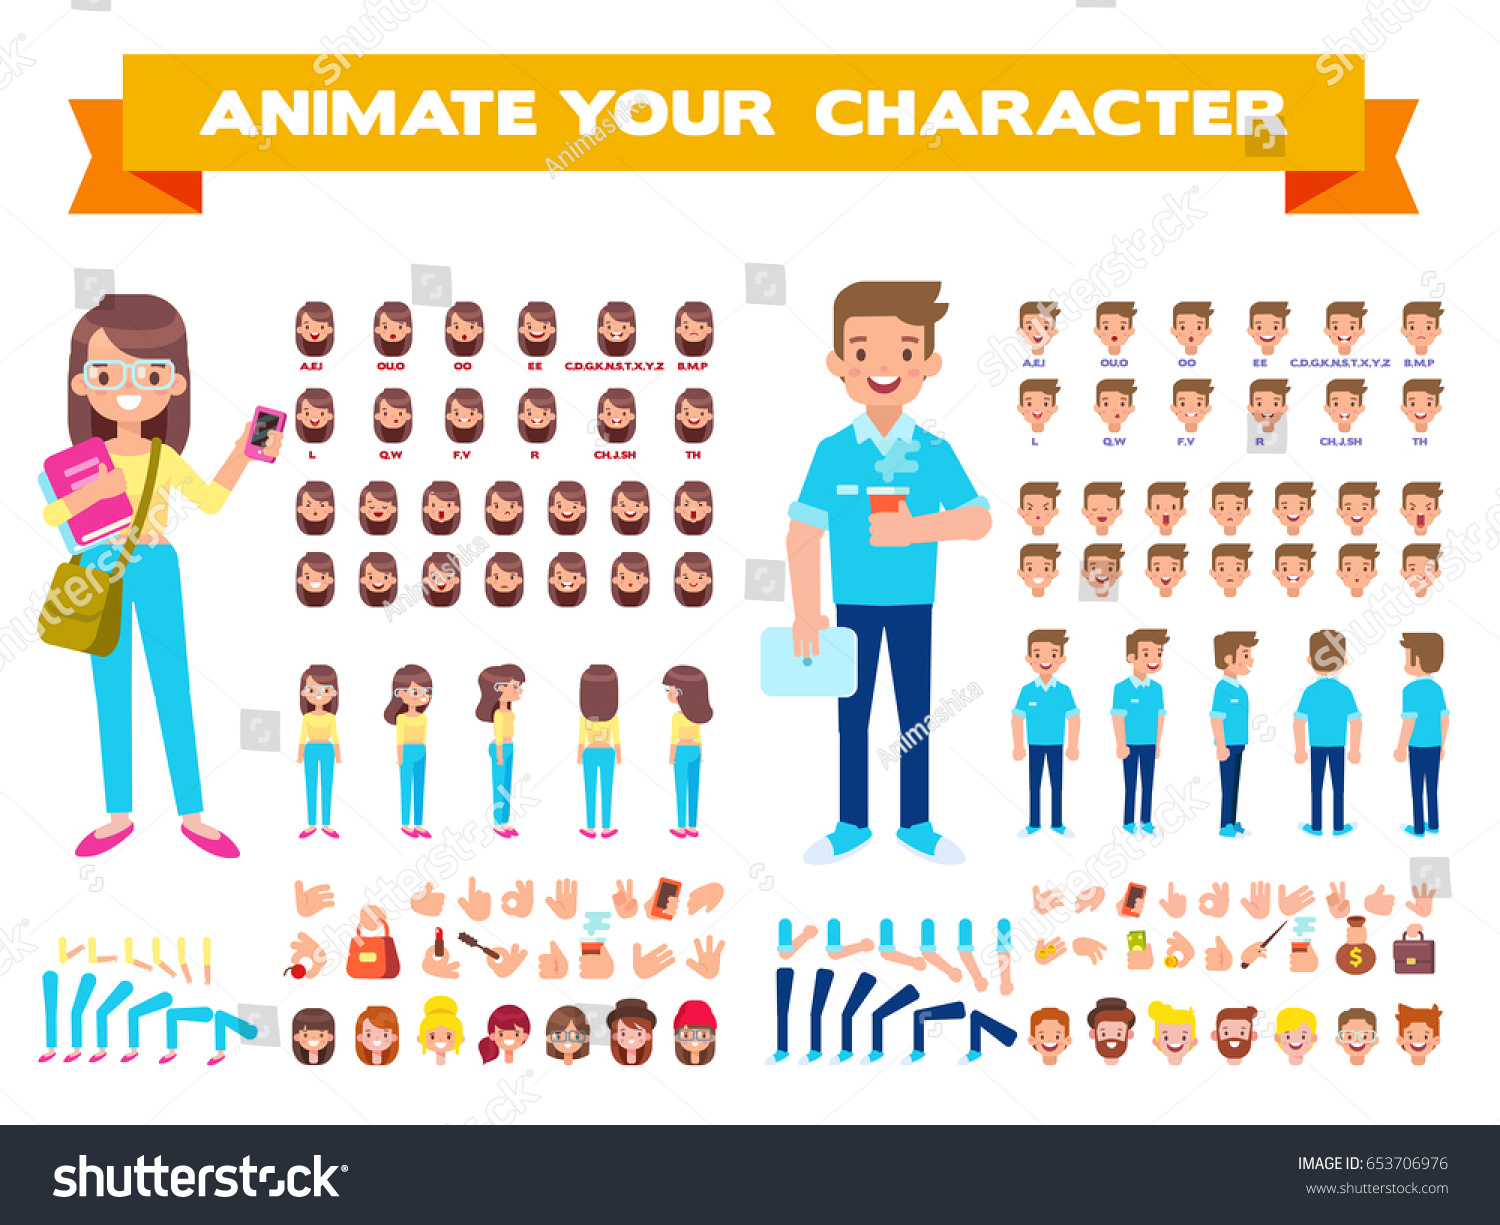 Front, side, back view animated characters. Male and female Students creation set with various views, hairstyles, face emotions, poses and gestures. Cartoon style, flat vector illustration. #653706976